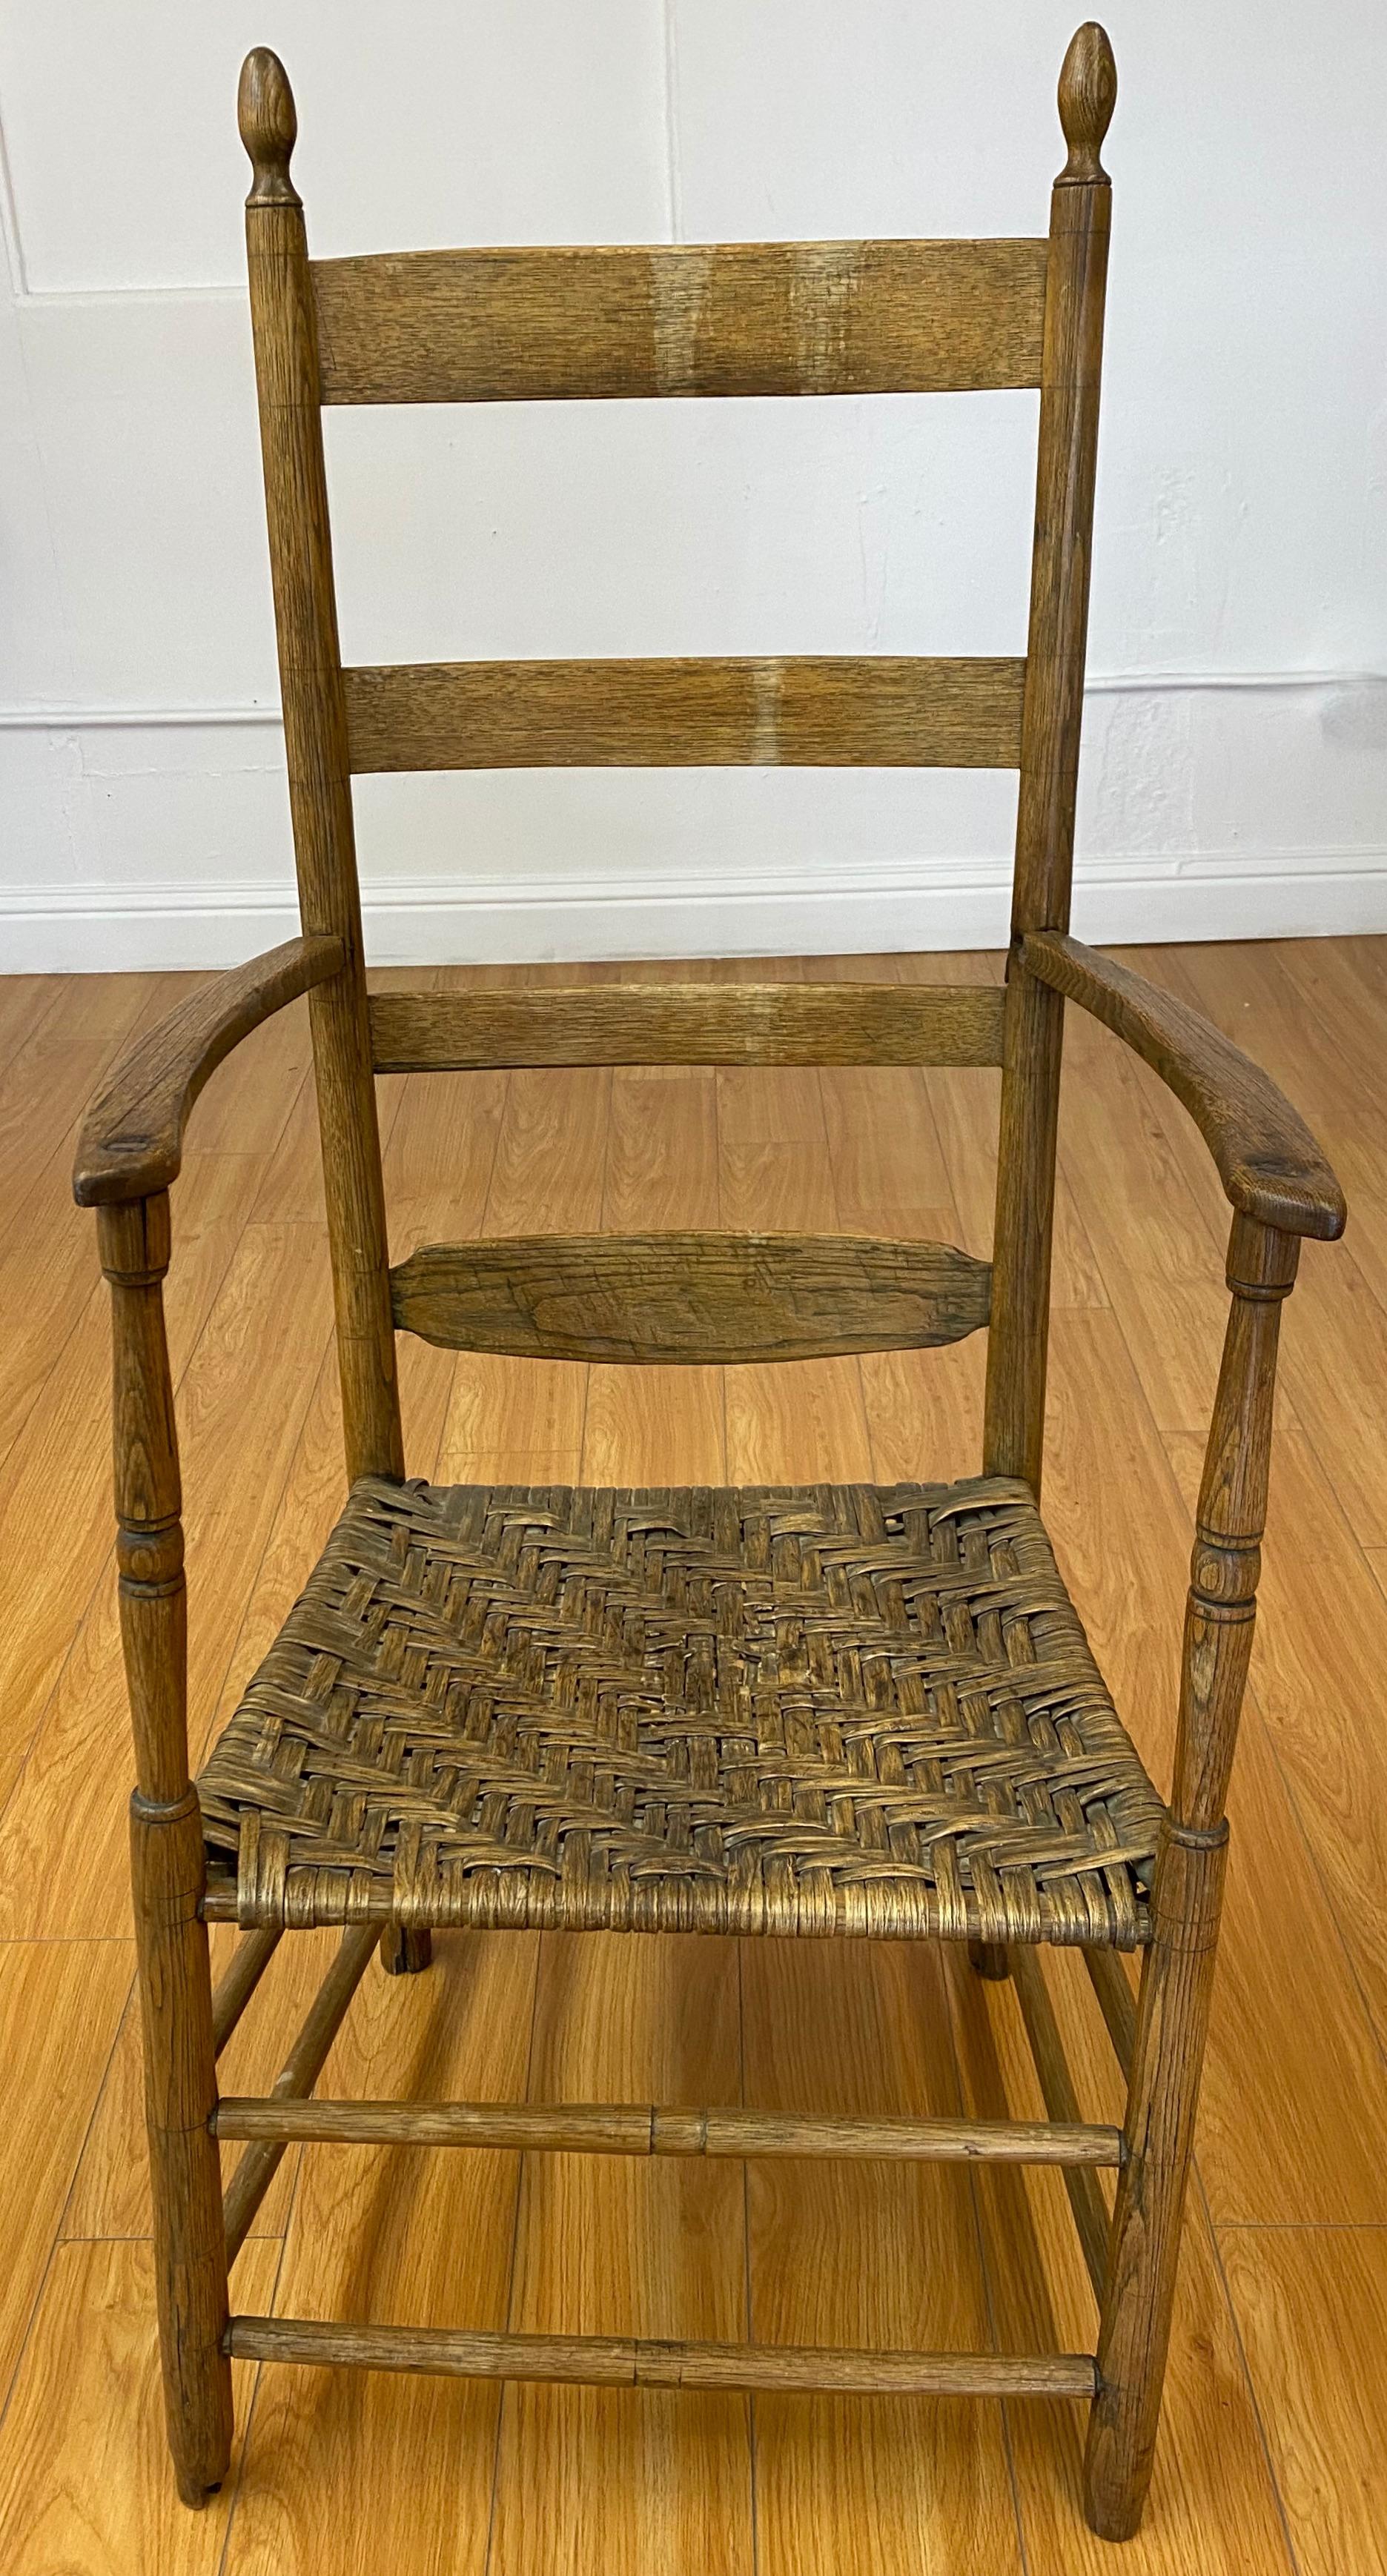 American Colonial 18th to 19th Century Ladder Back Chair with Reed Seat